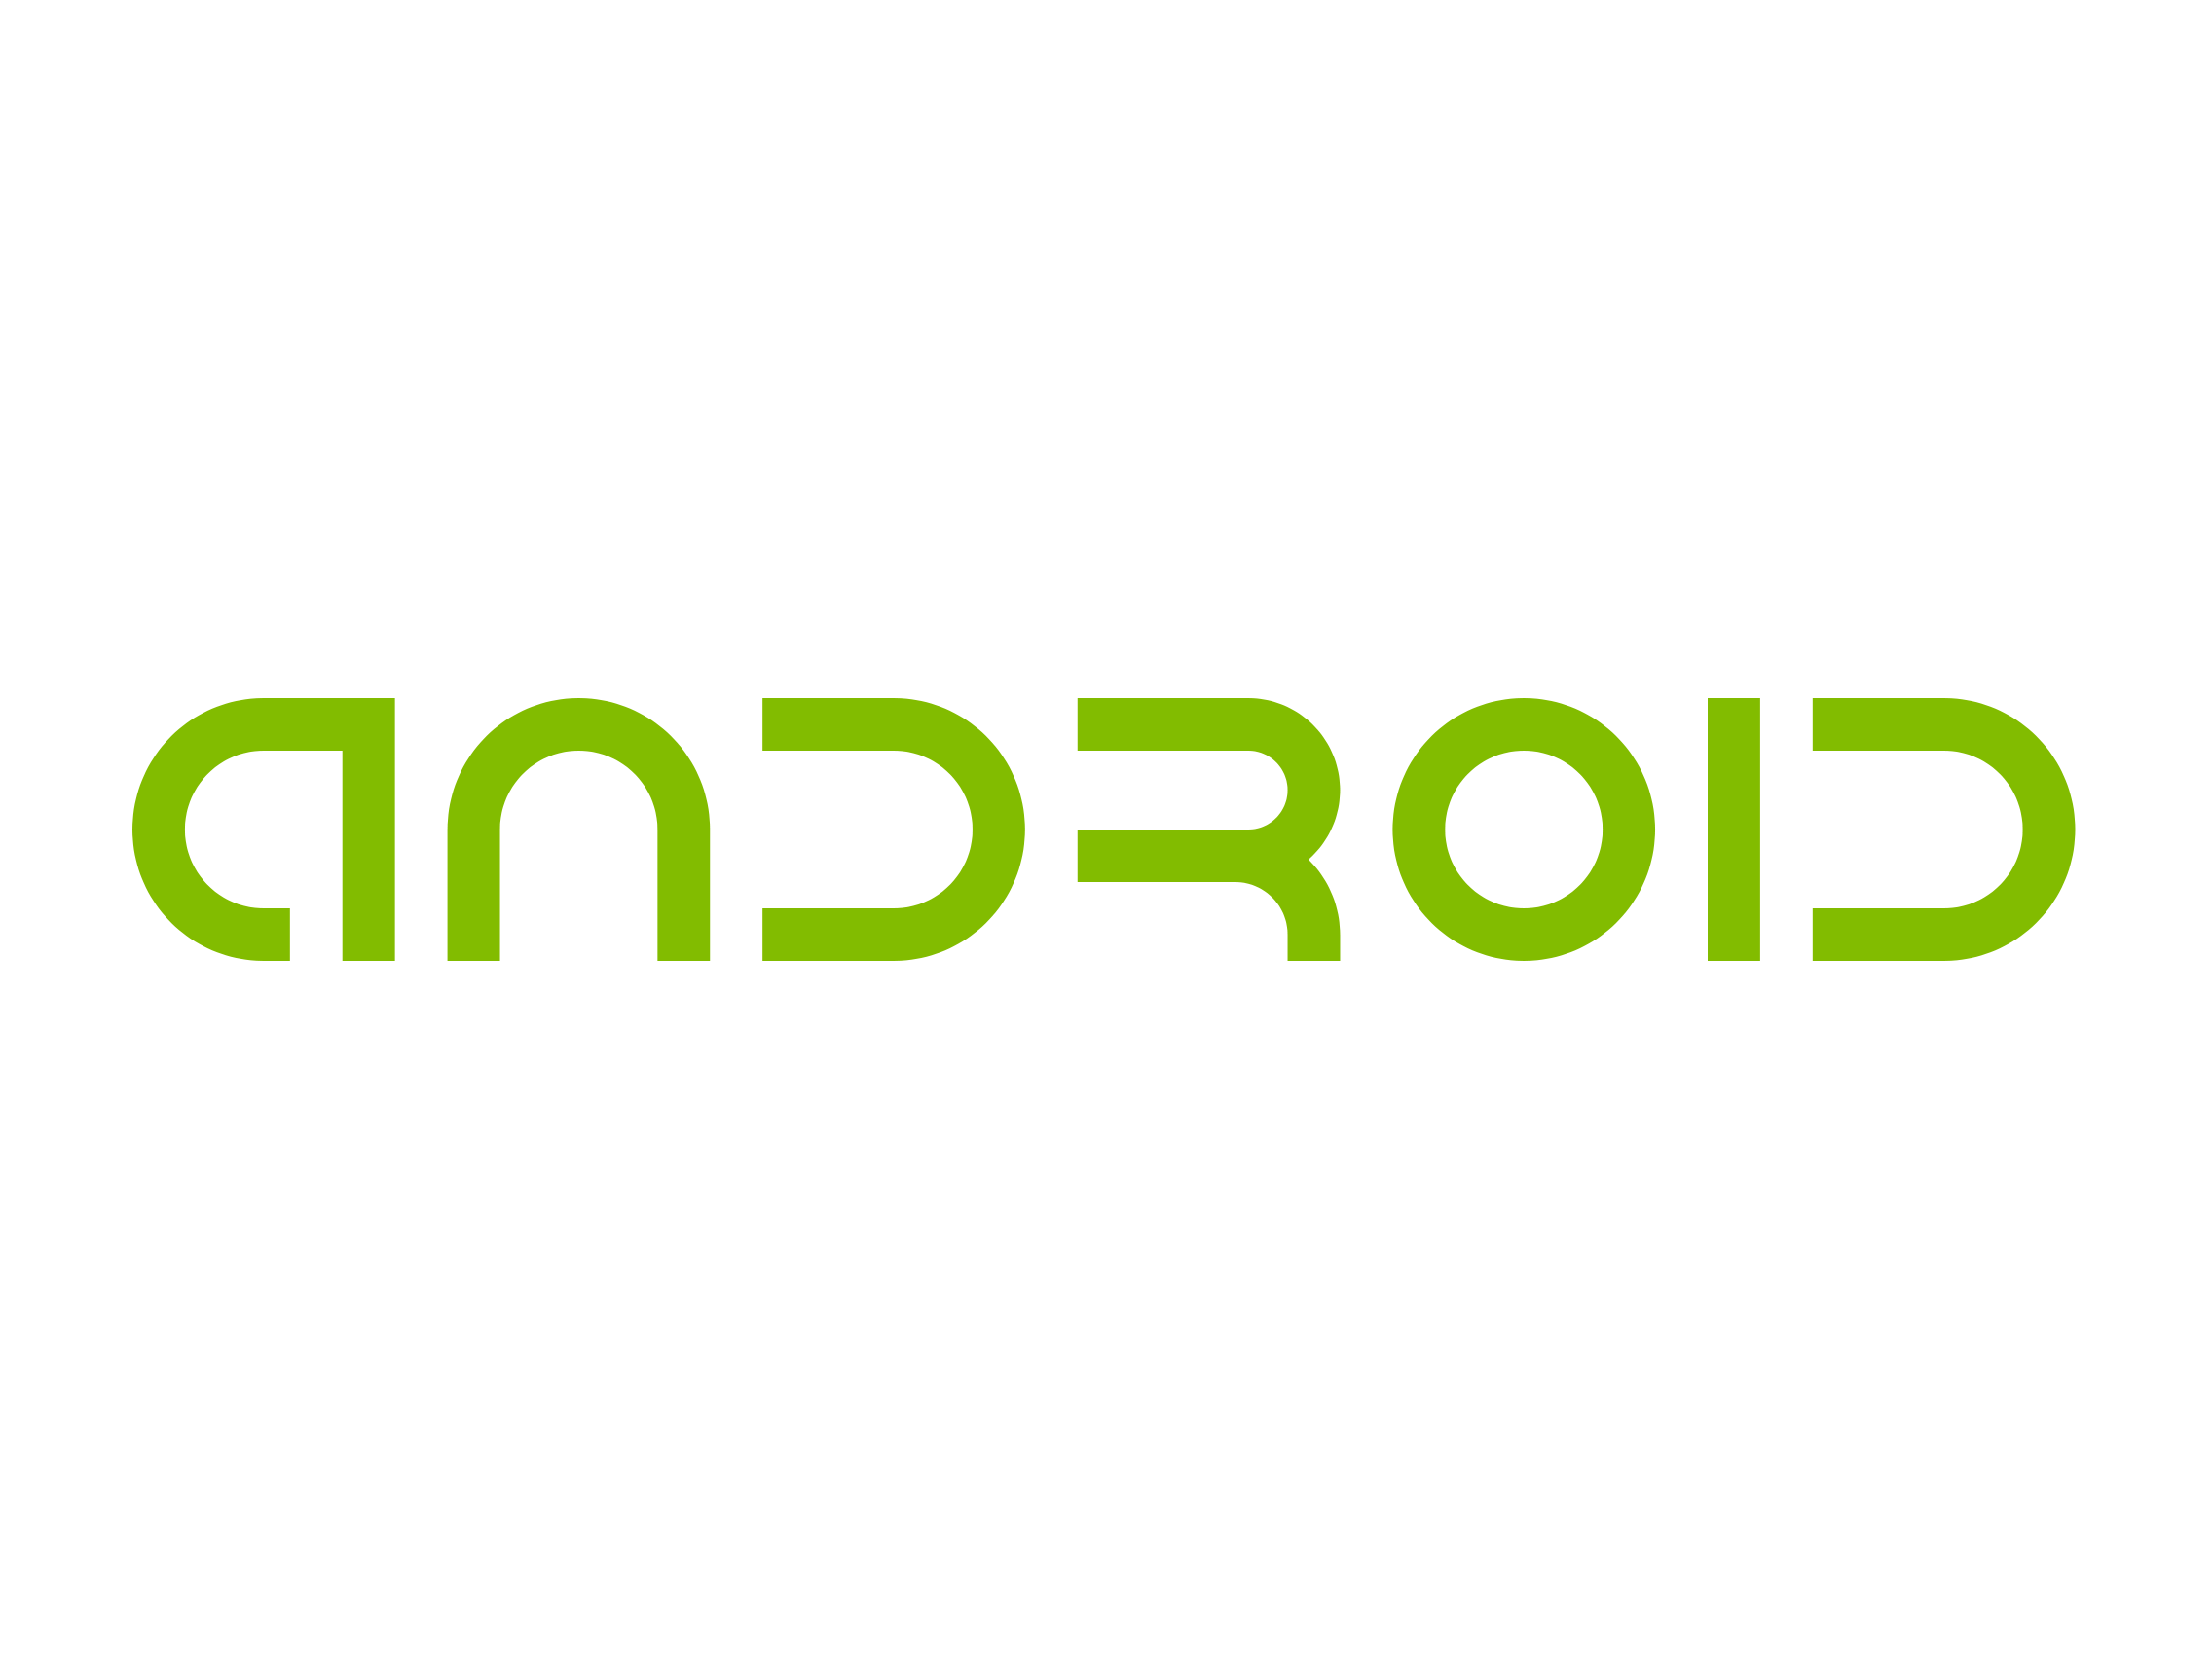 android icon transparent png